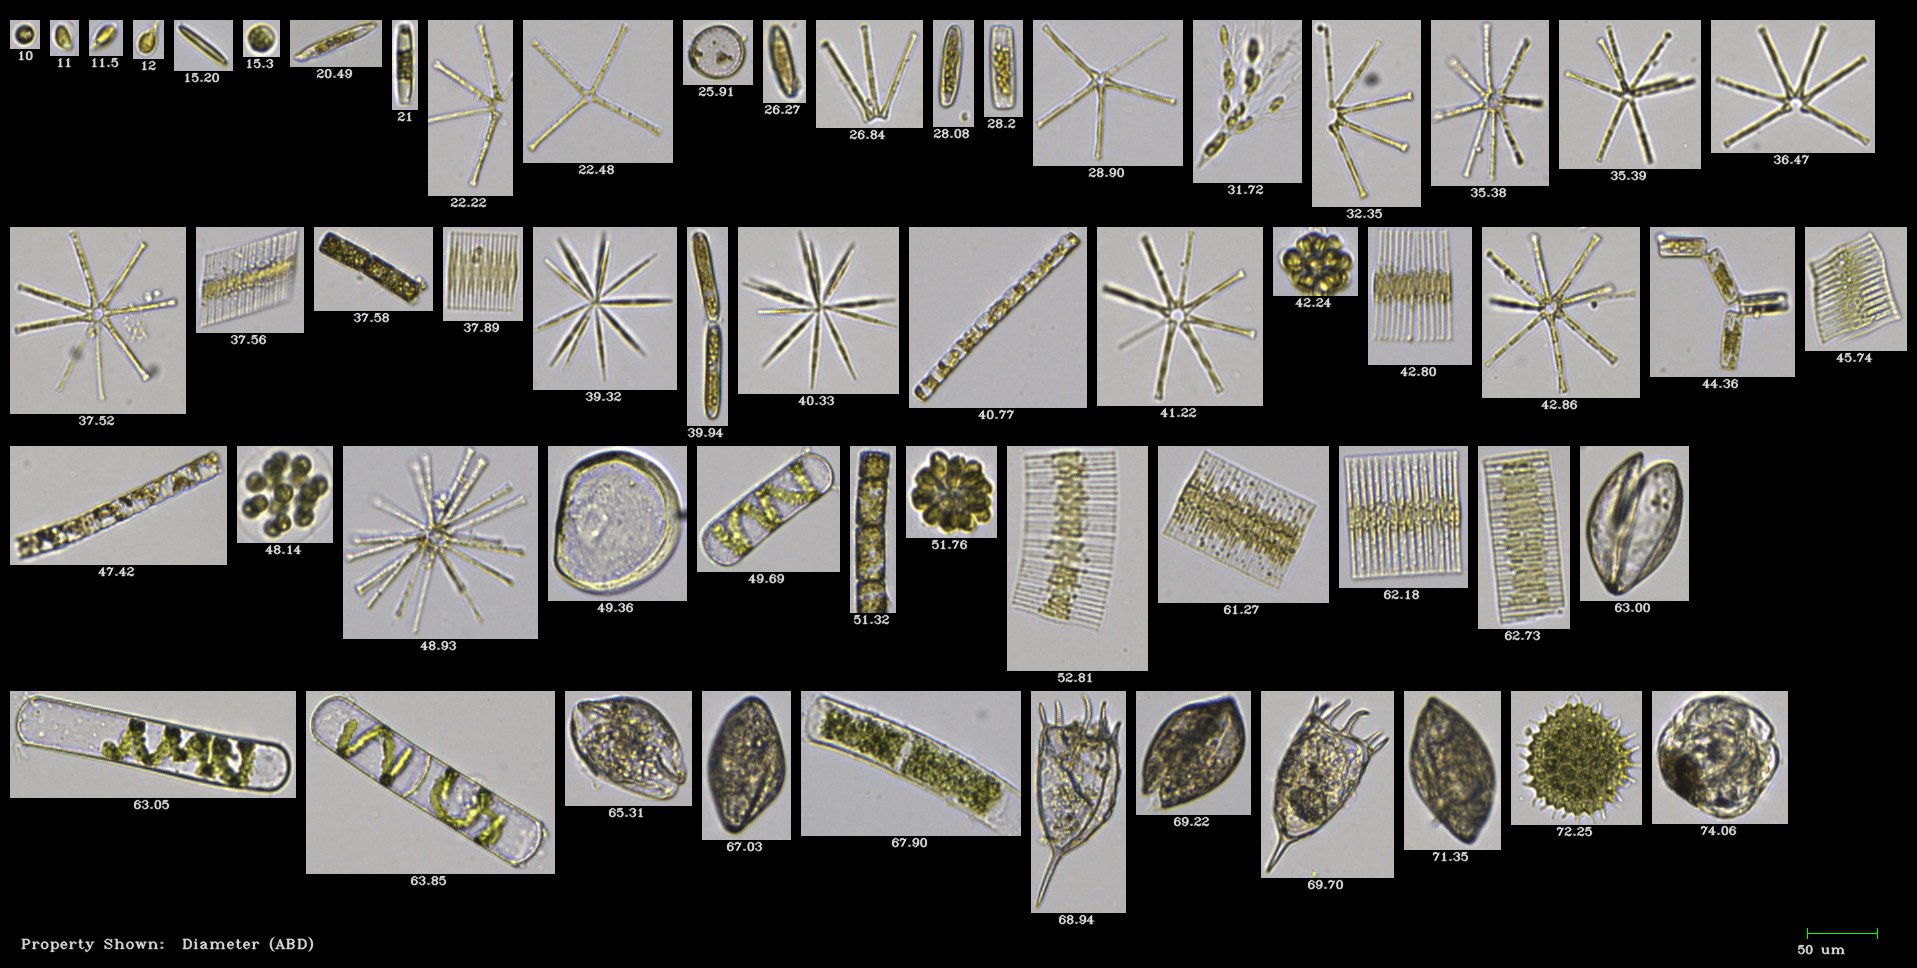 A FlowCam VisualSpreadsheet collage containing images of freshwater phytoplankton